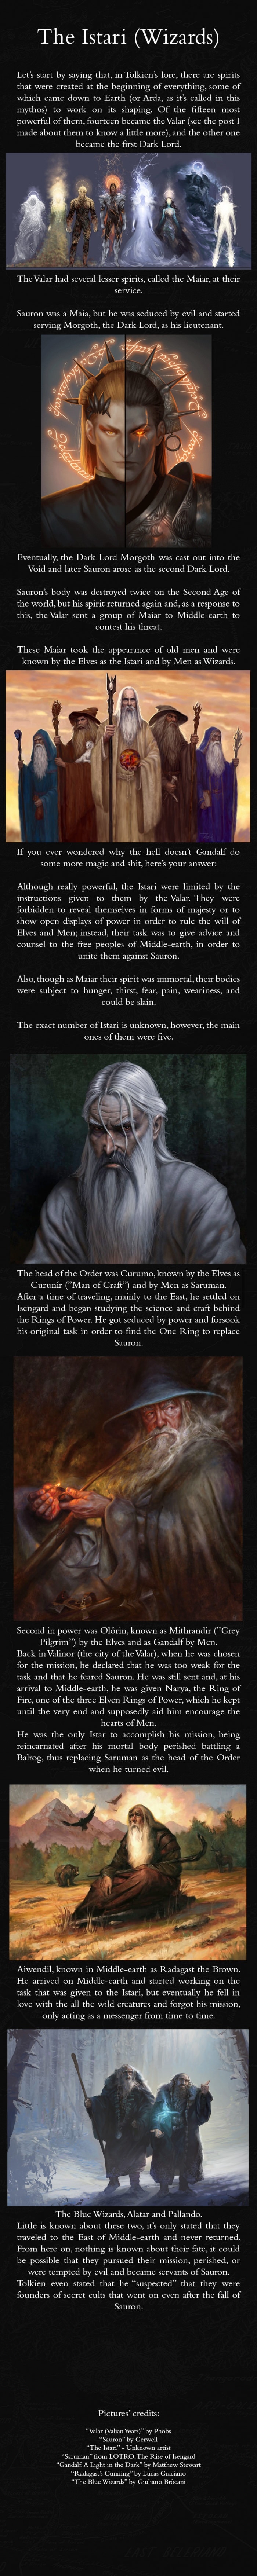 The Wizards of Middle-Earth